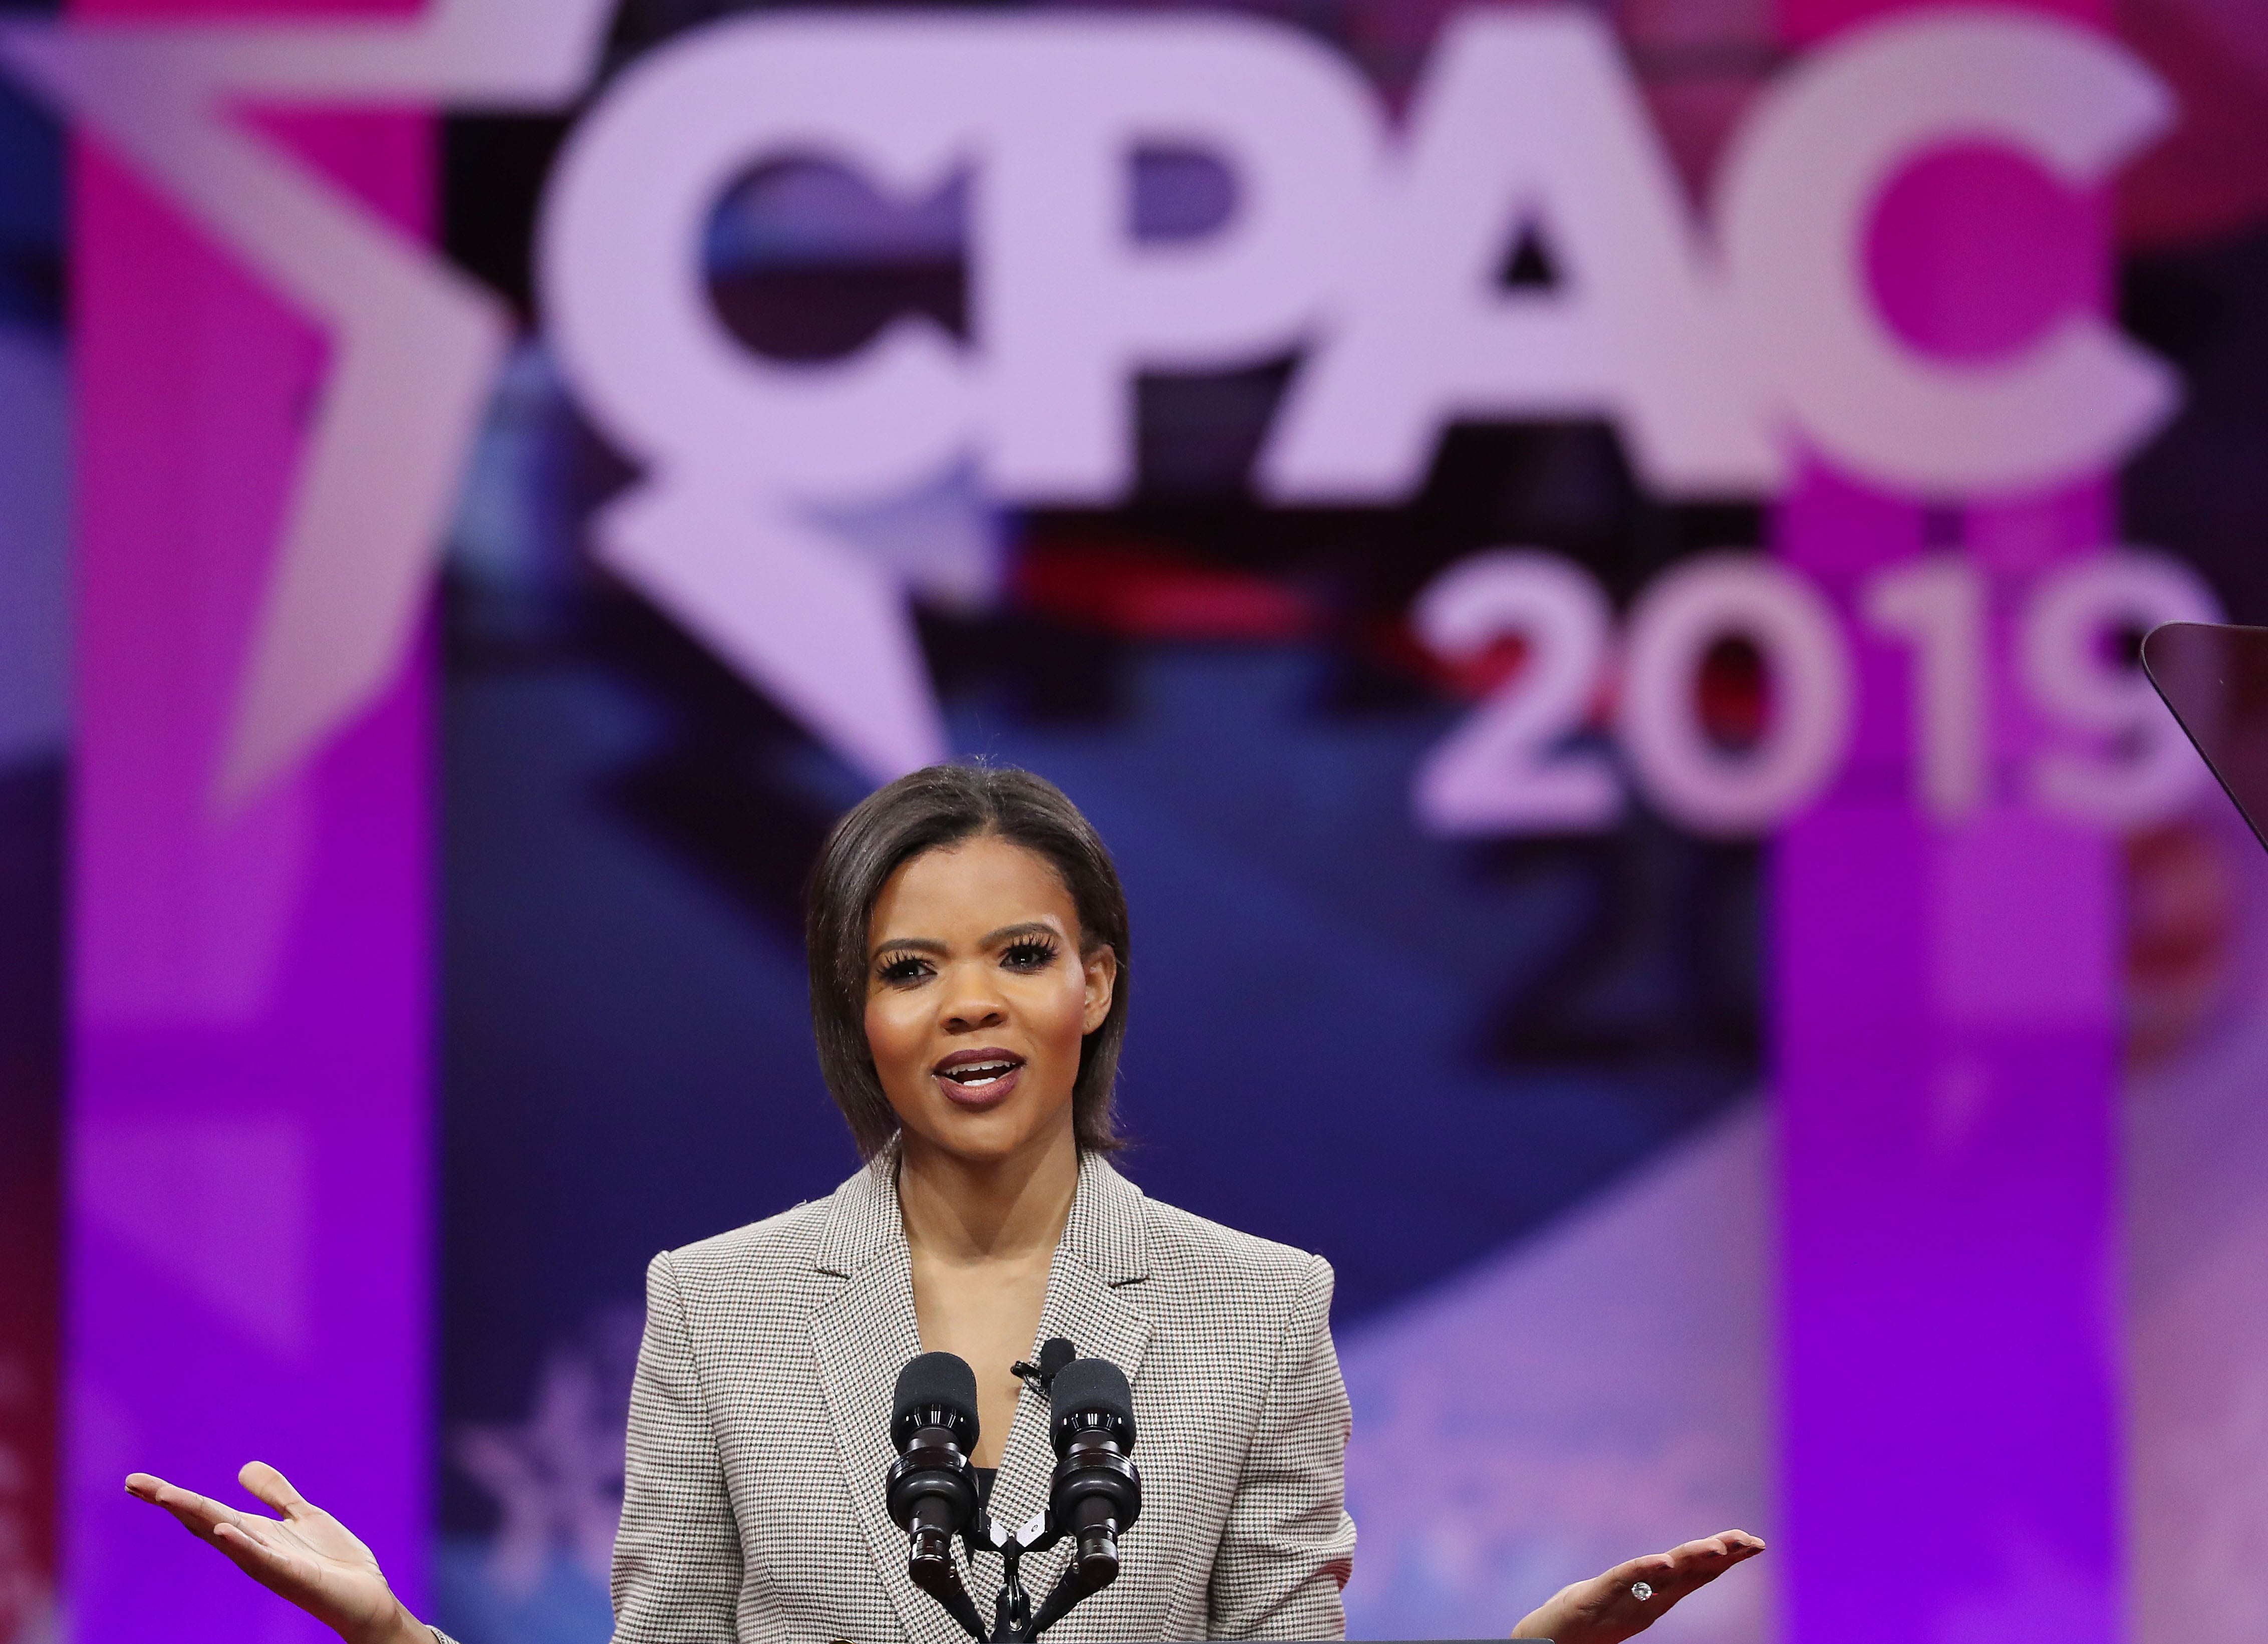 T.I. Drags Candace Owens At Revolt Summit: 'Which Period Was America Great?'